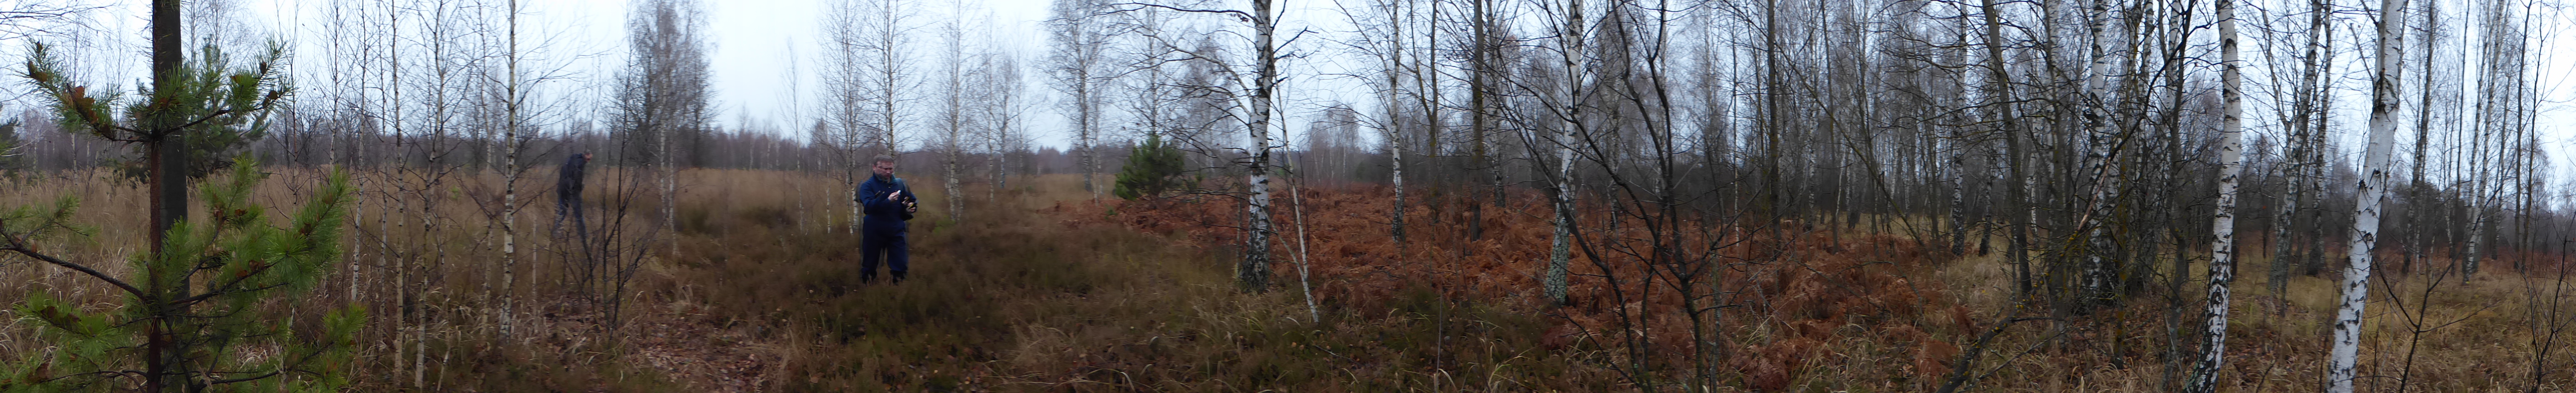 Chernobyl sampling site located on the edge of the 'Red Forest' (Photo credit: Nick Beresford)